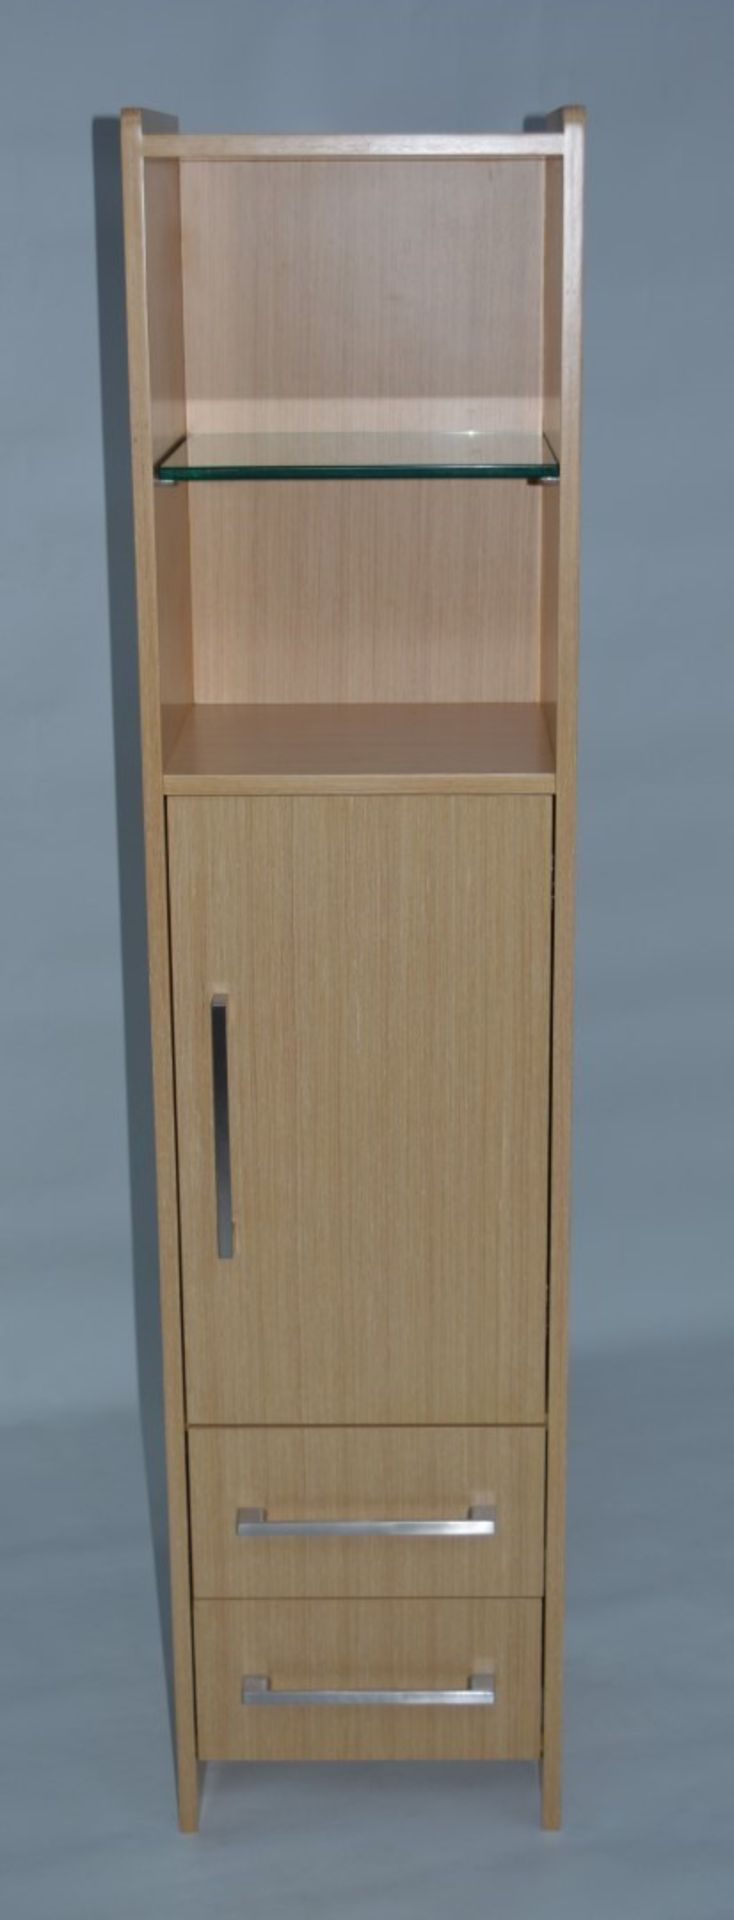 1 x Vogue ARC Series 2 Bathroom Floor Standing TALL BOY in LIGHT OAK - Manufactured to the Highest - Image 5 of 5